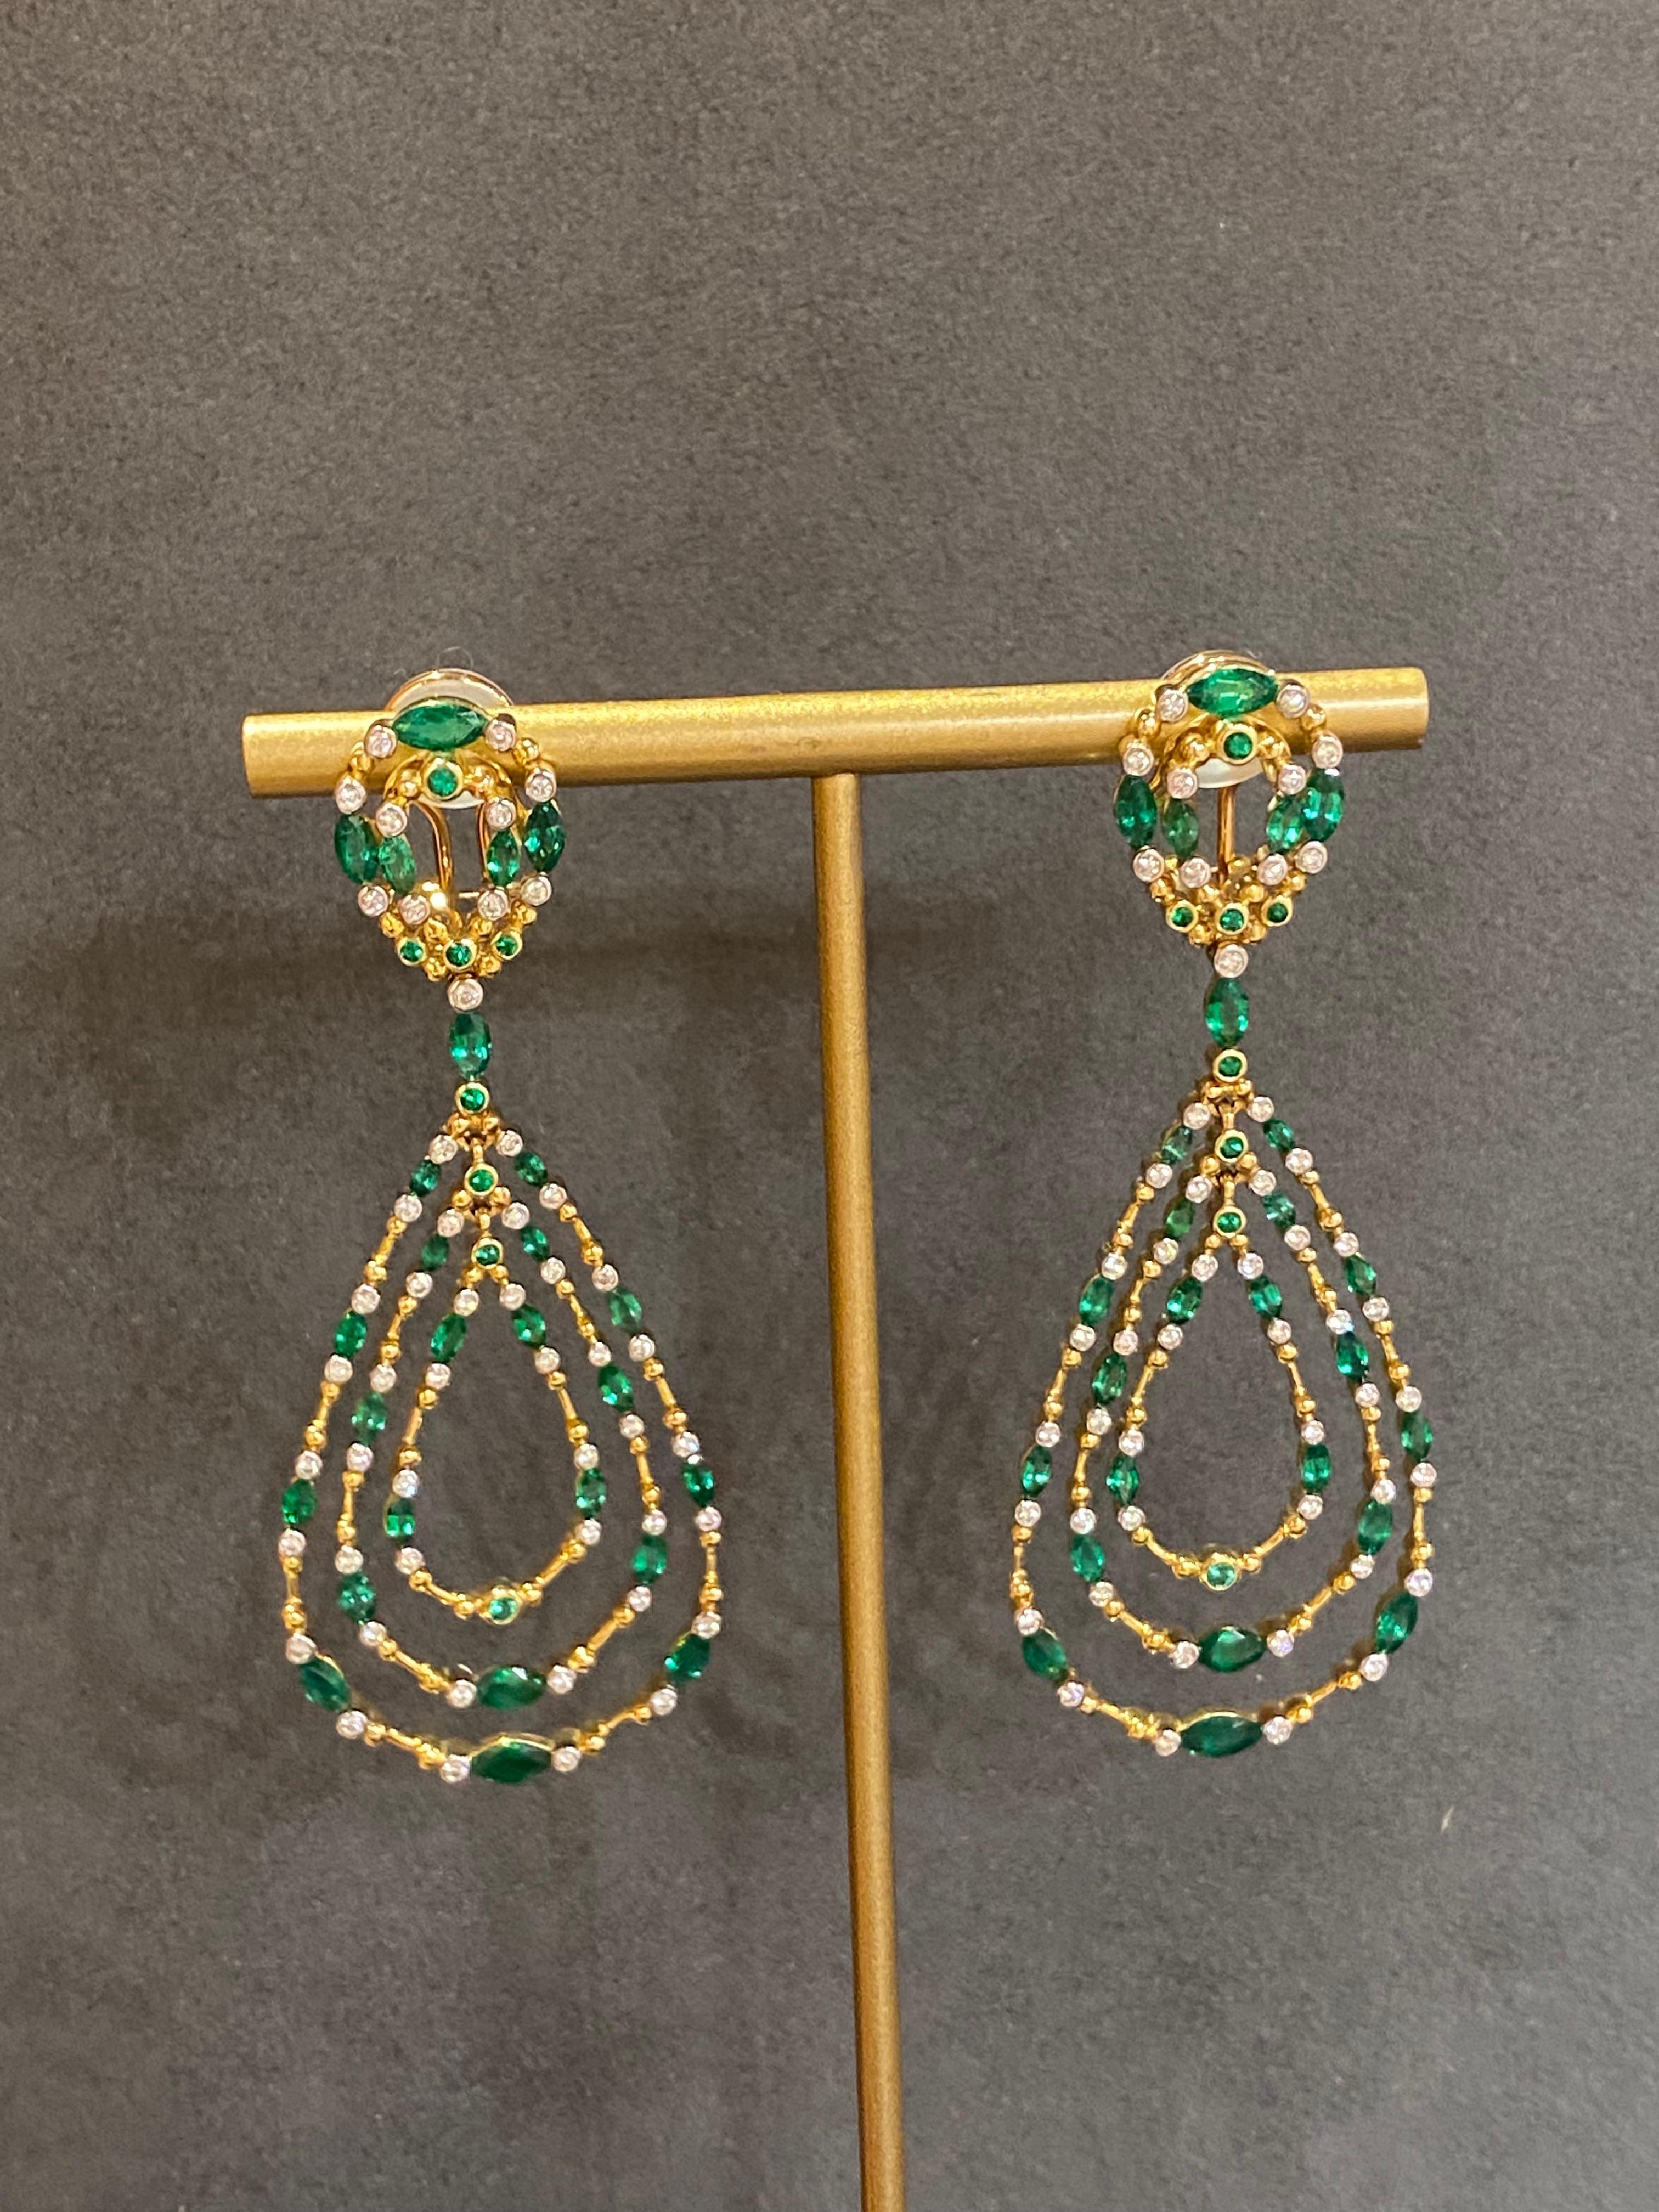 Modern Unique Dangle Diamond Emerald Yellow 18K Gold Earrings for Her For Sale